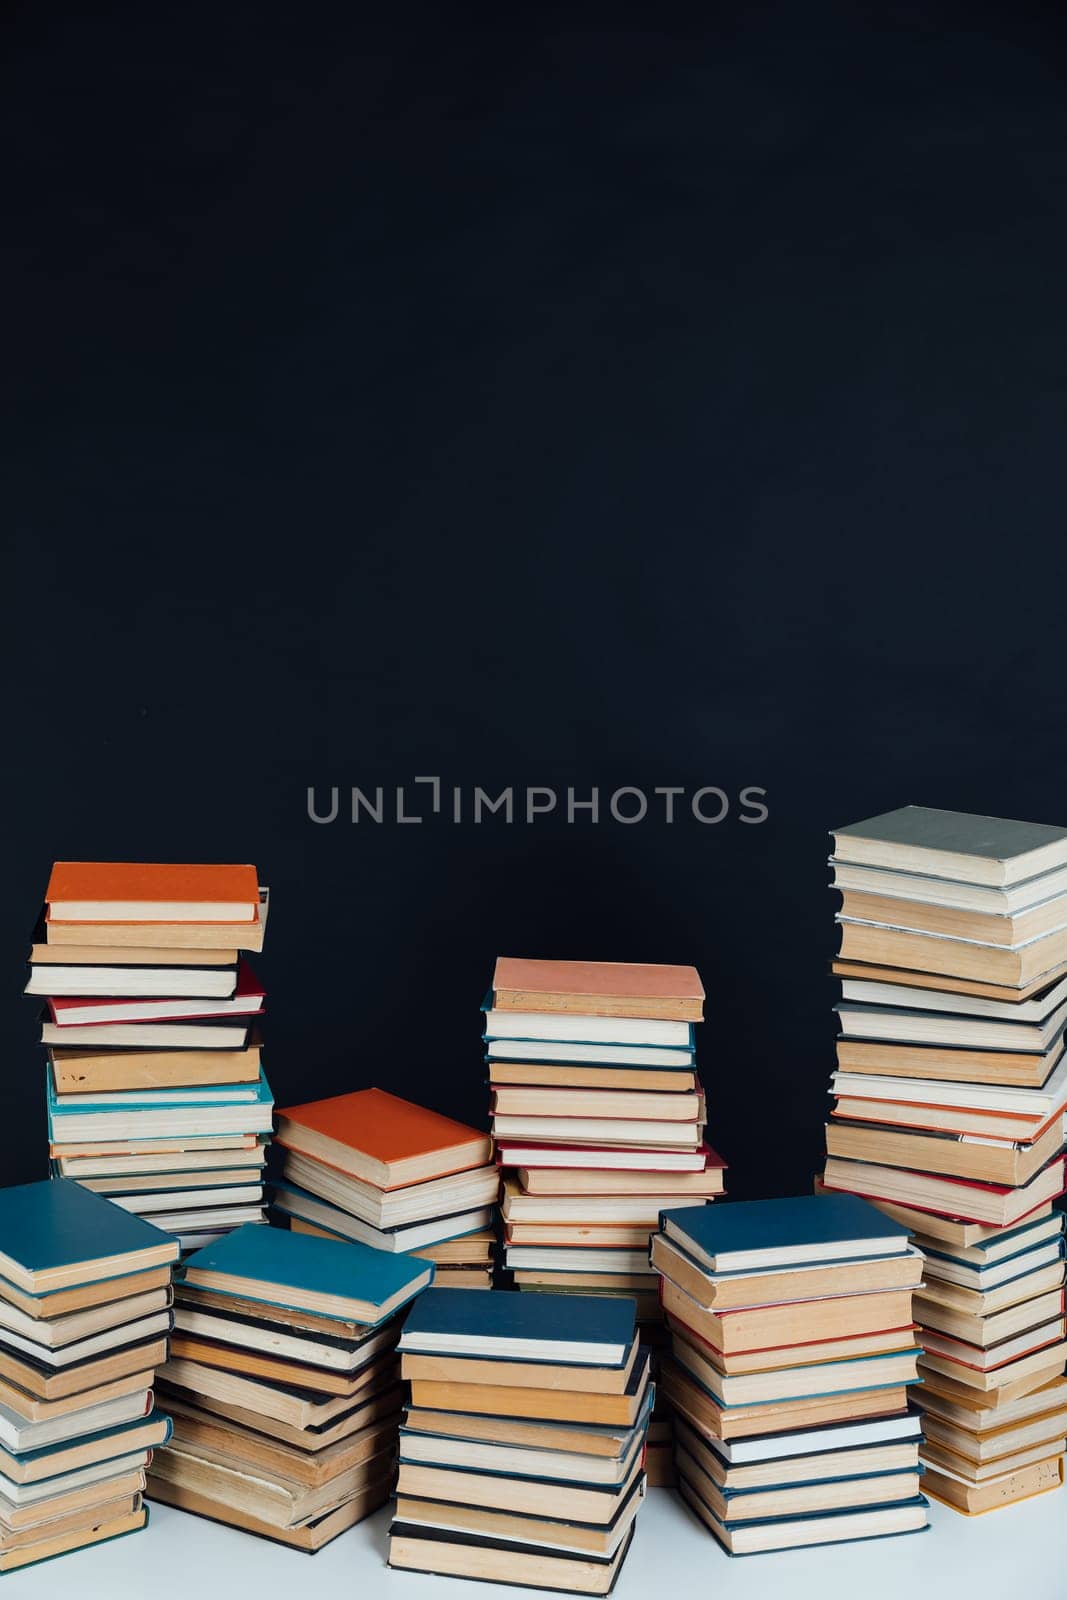 Lots of stacks of educational books on black background library